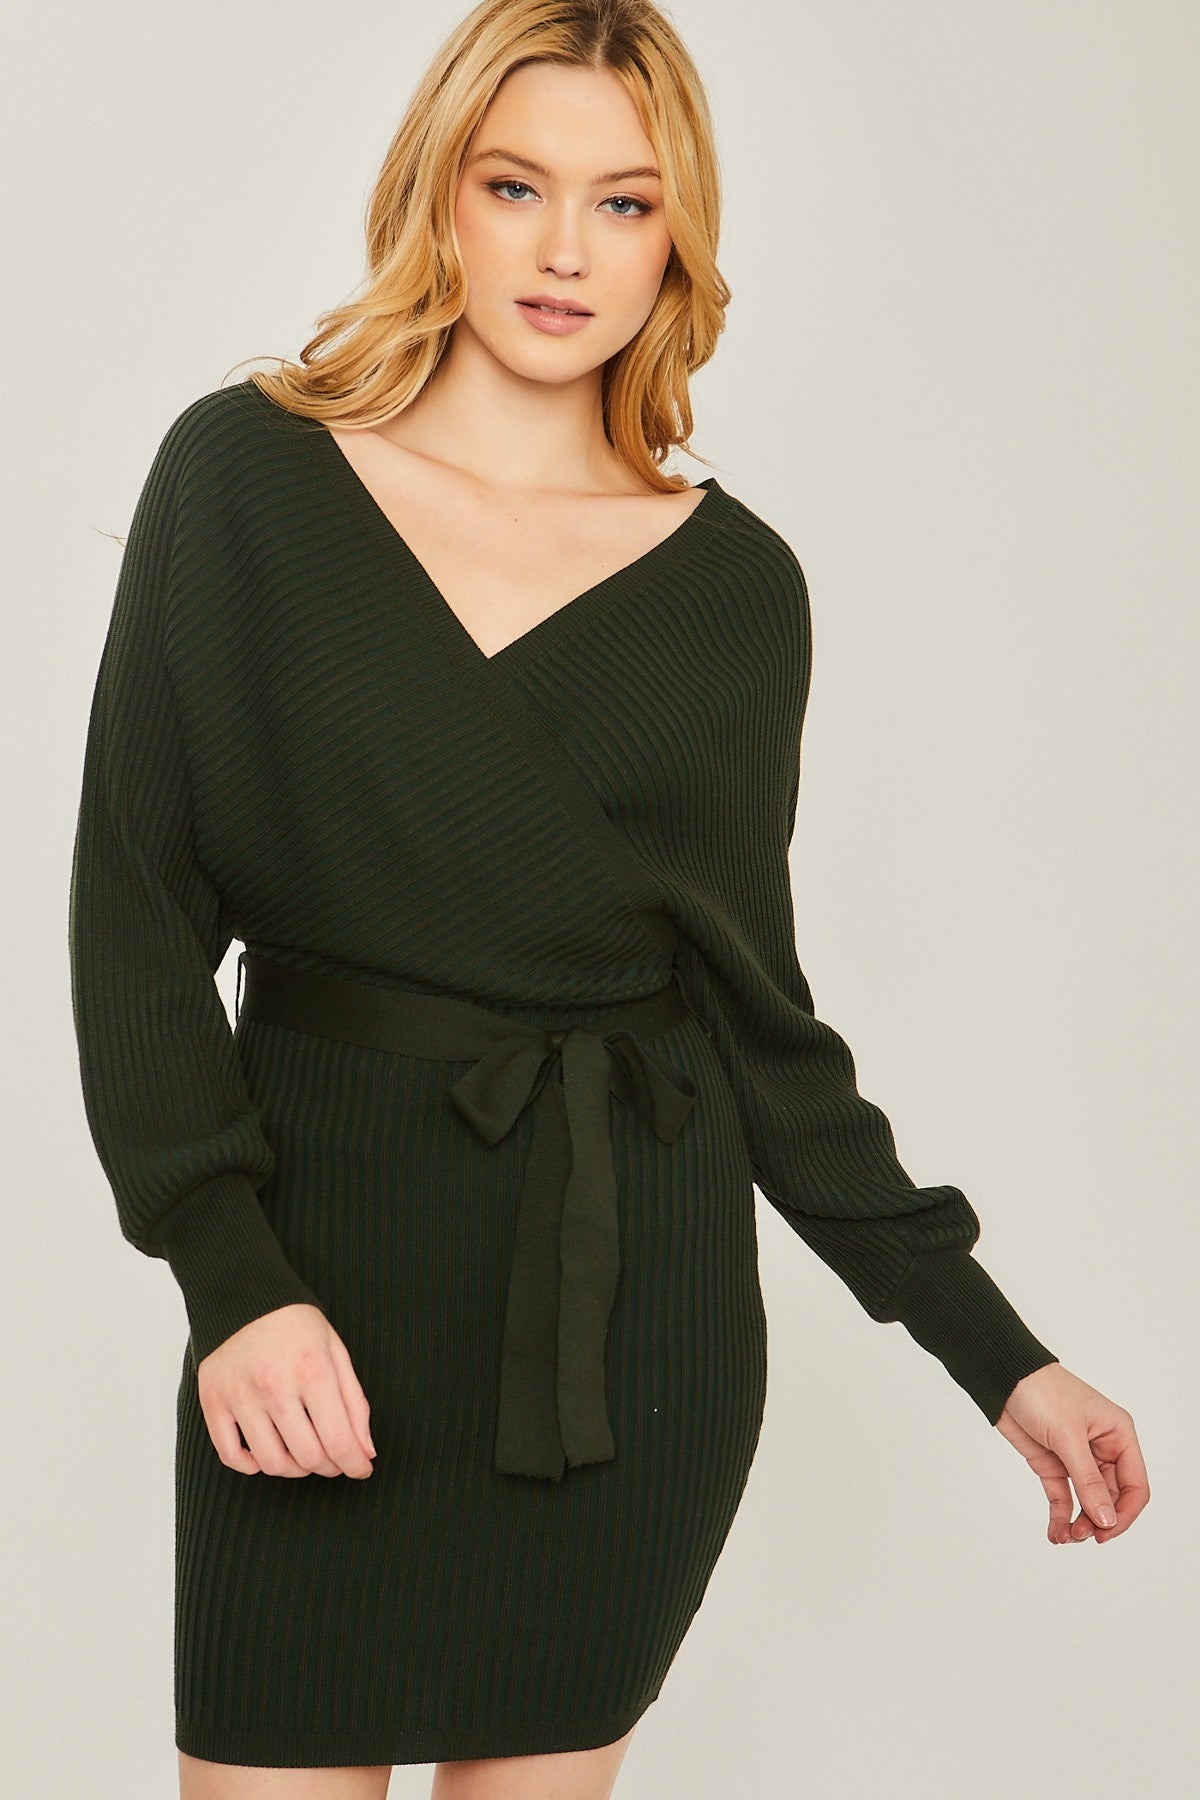 I Know You Green Sweater Dress